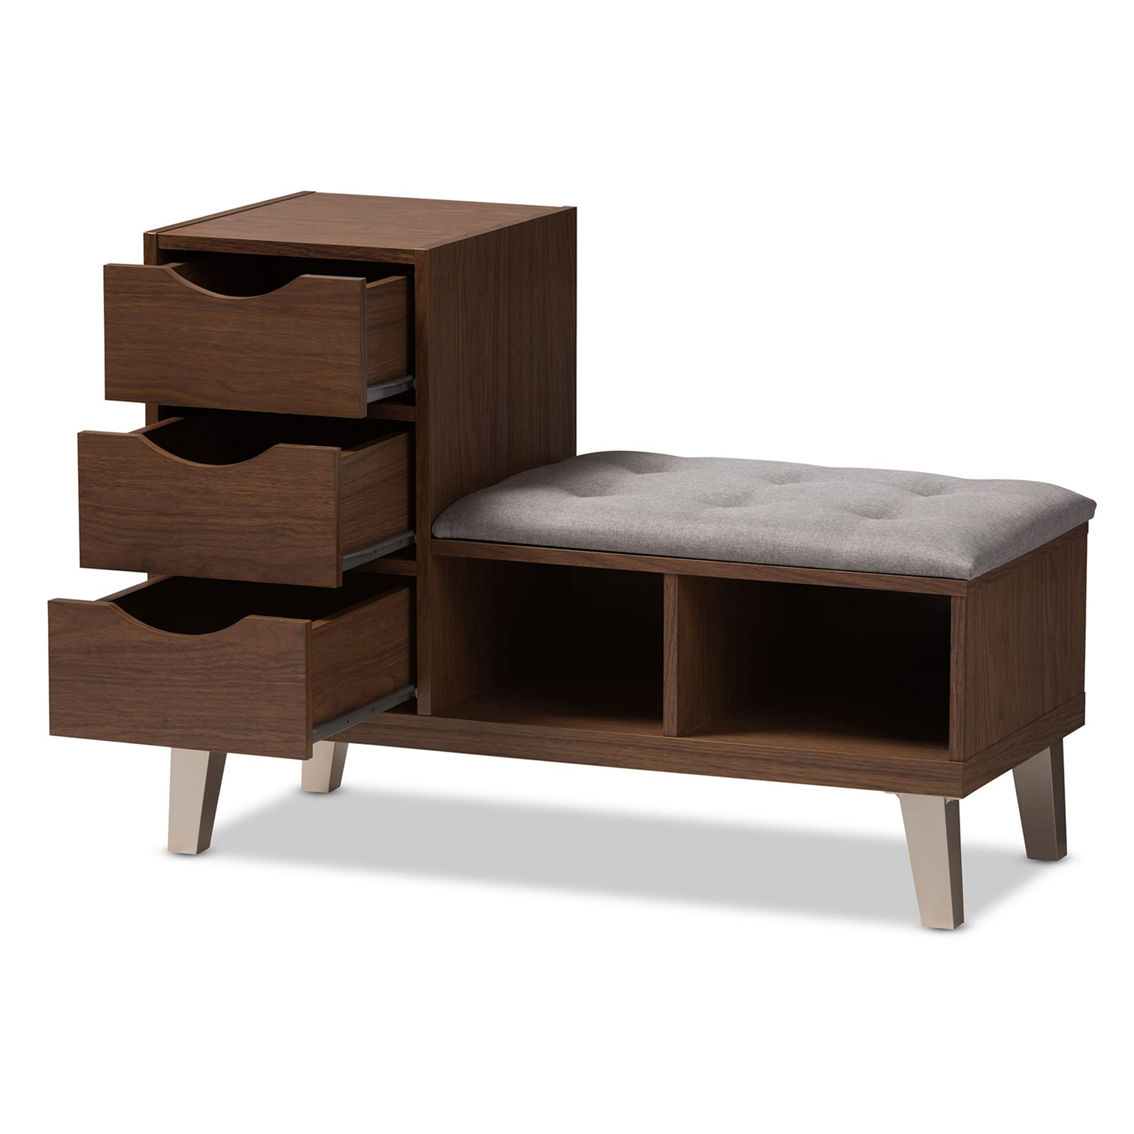 Baxton Studio Arielle Walnut Wood 3-Drawer Shoe Storage With Upholstered Bench - Image 2 of 5